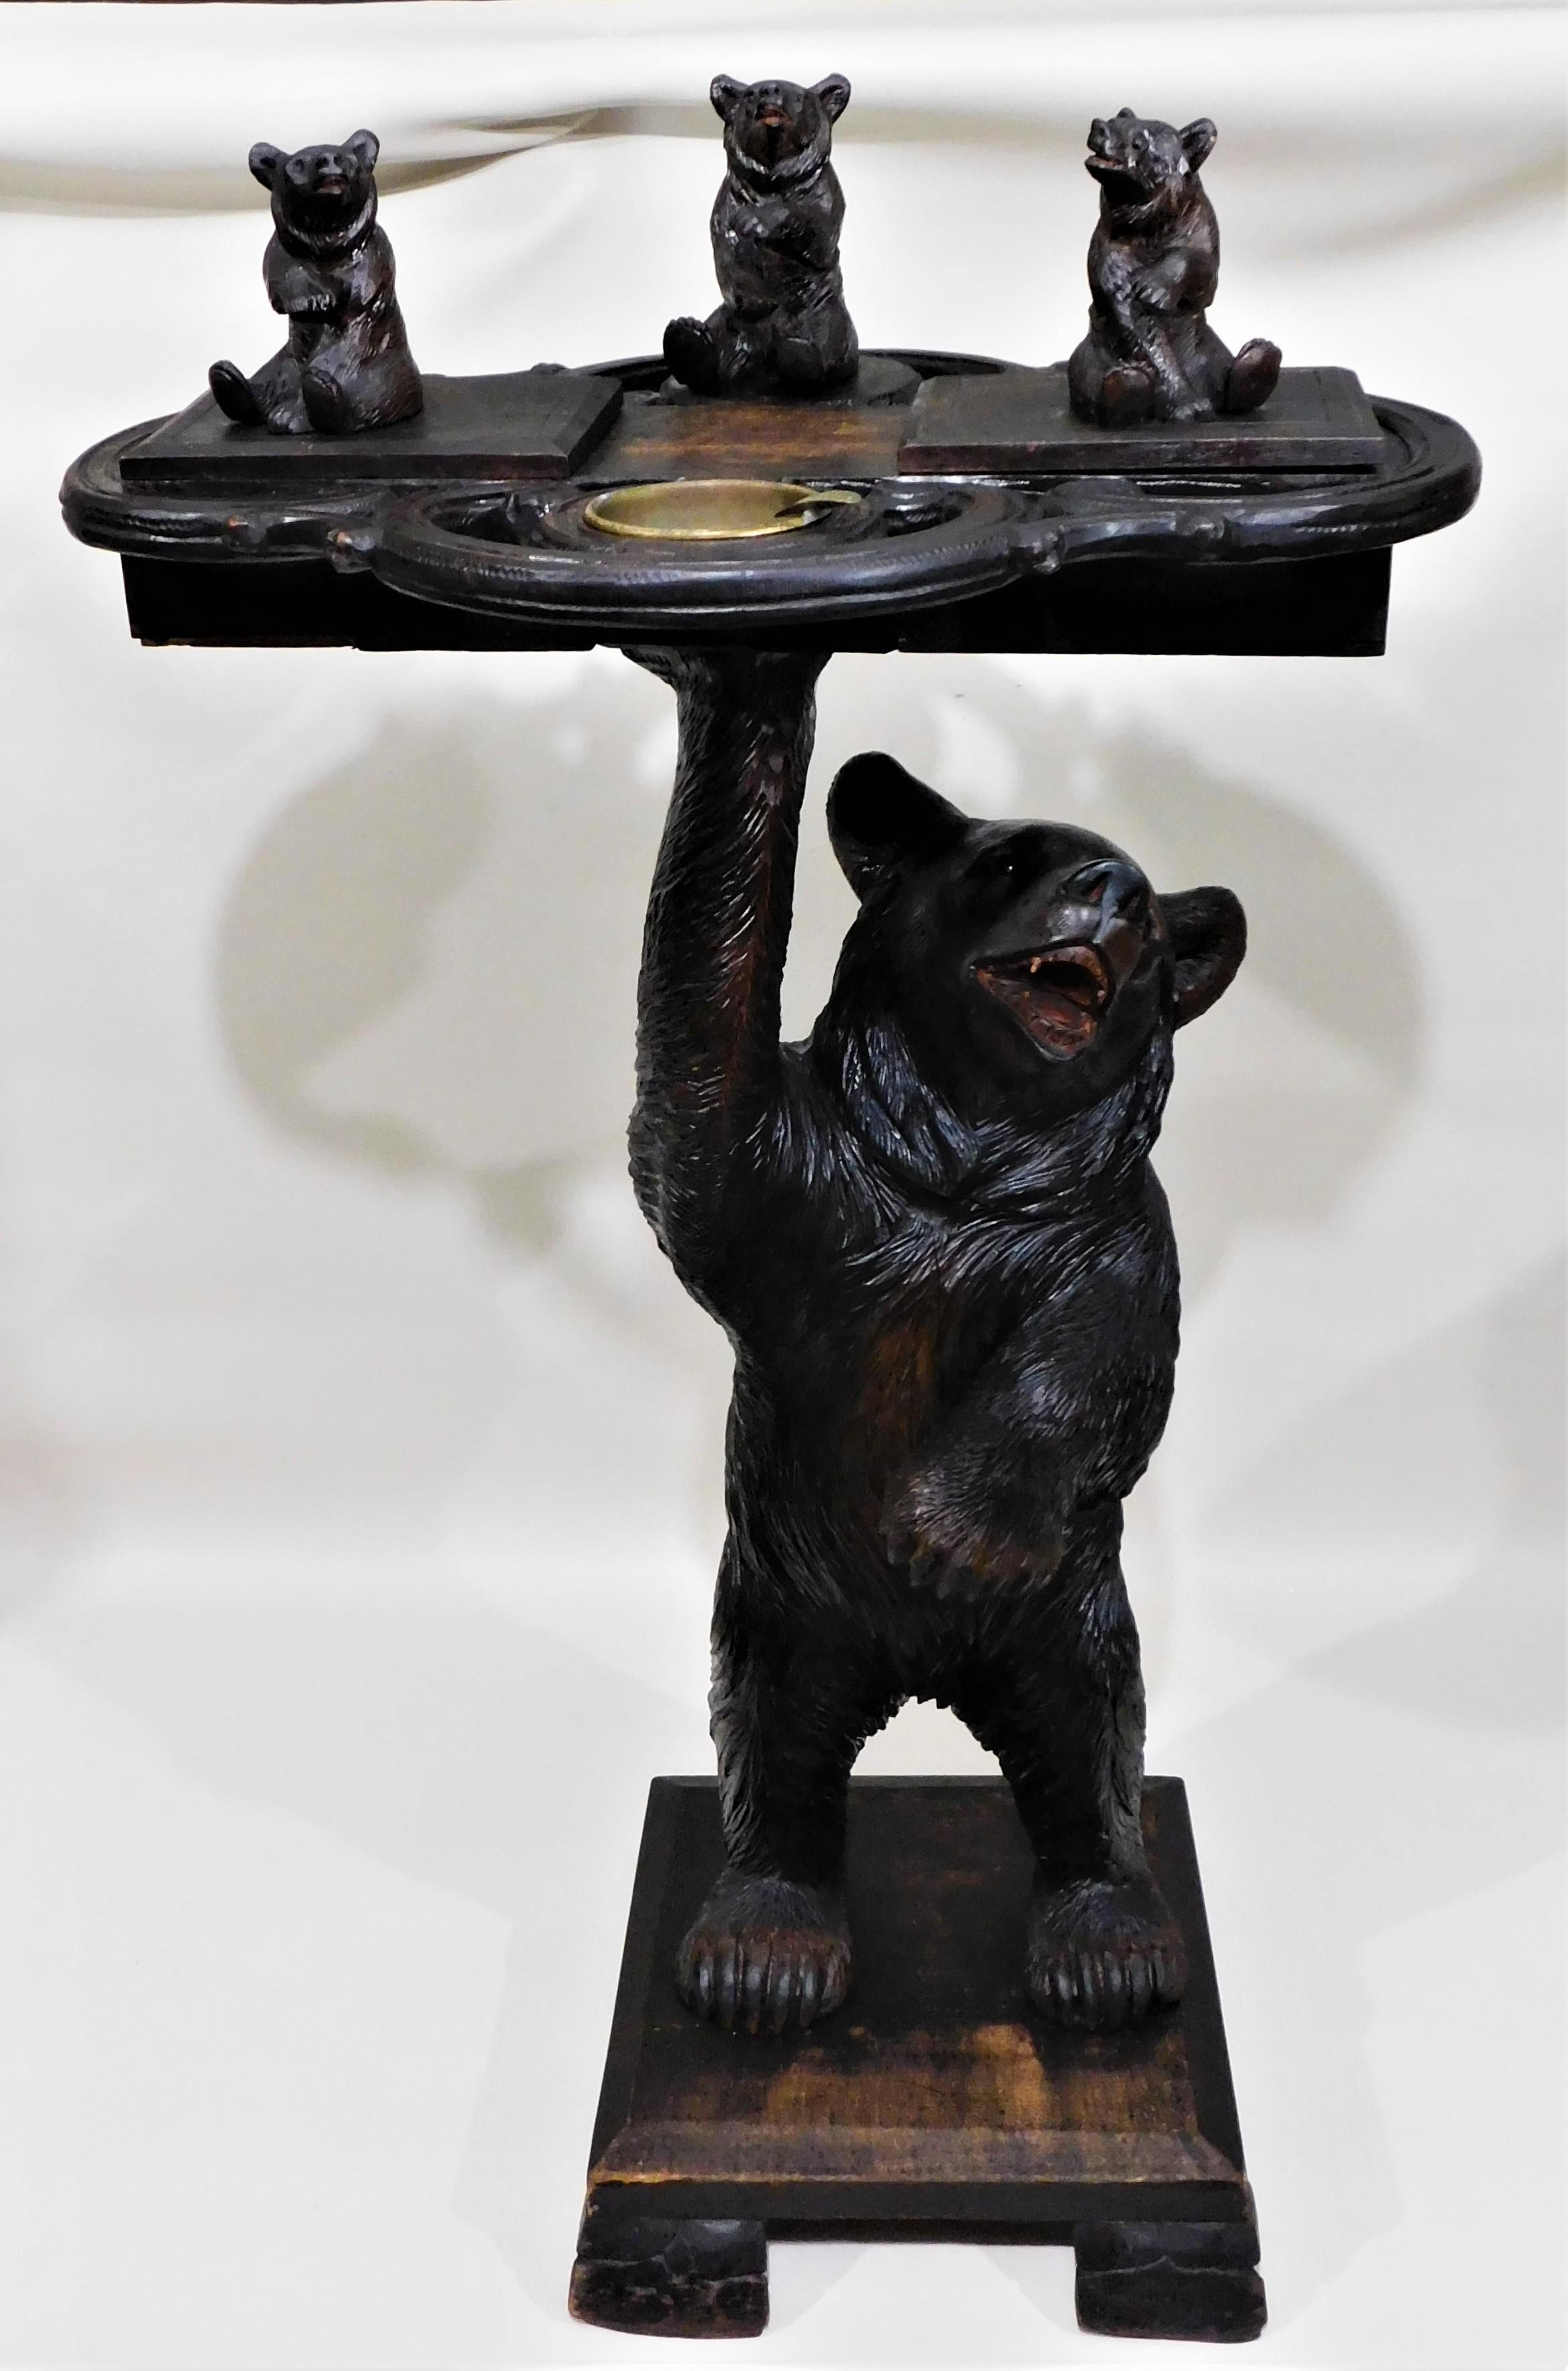 Wood Black Forest Carved Bears Smokers Table Stand with Brass Ashtray, circa 1890s